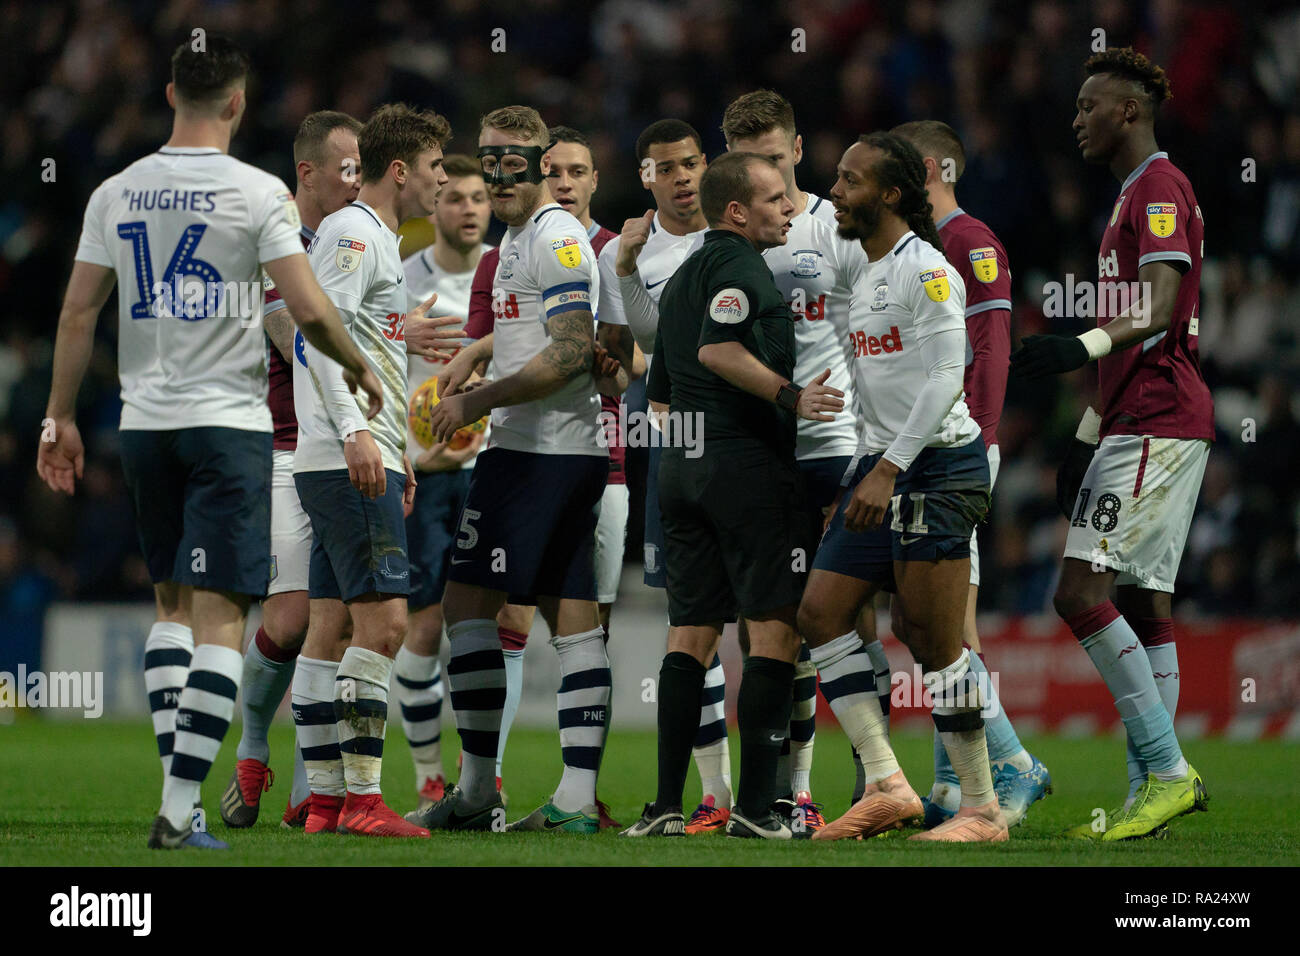 Tempers flare at the match following a tackle on Aston Villa's John McGinn by Preston North End's Daniel Johnson  29th December 2018, Deepdale, Preston, England; Sky Bet Championship, Preston North End vs Aston Villa ;    Credit: Terry Donnelly/News Images  English Football League images are subject to DataCo Licence Stock Photo